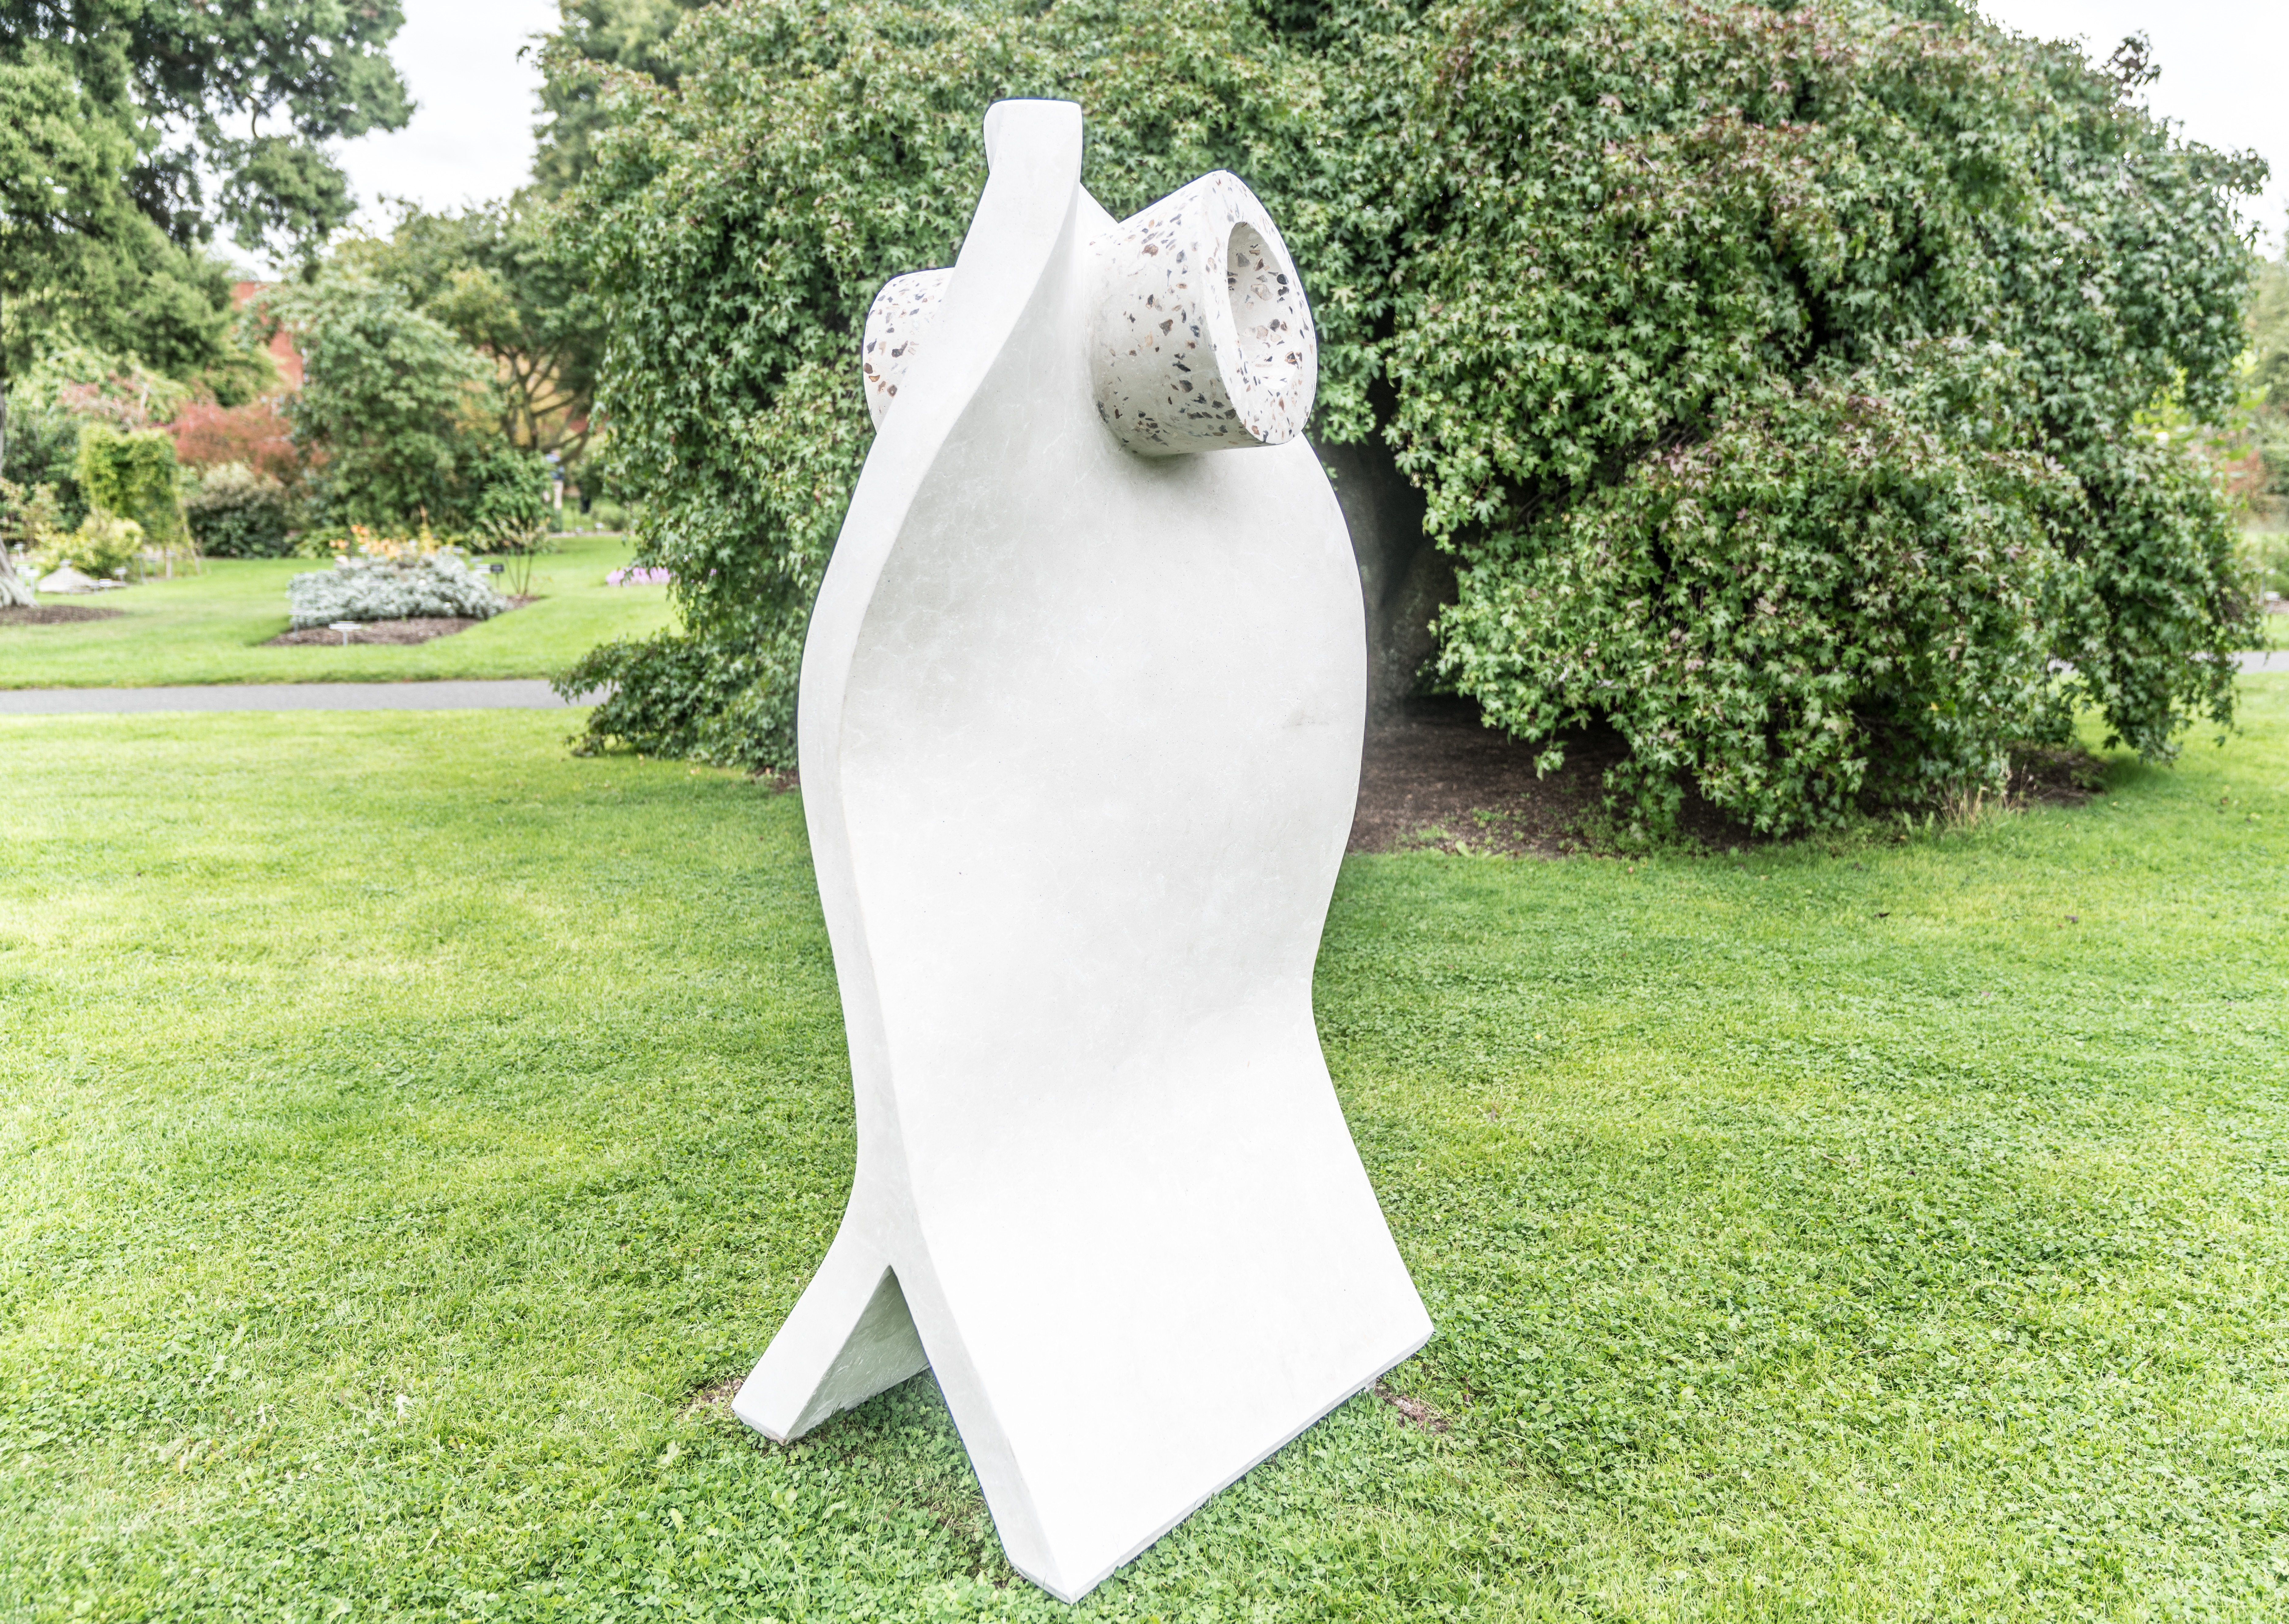 CONICAL VIEWER WITH TWIST BY KEN DREW [SCULPTURE IN CONTEXT 2017]-1324595